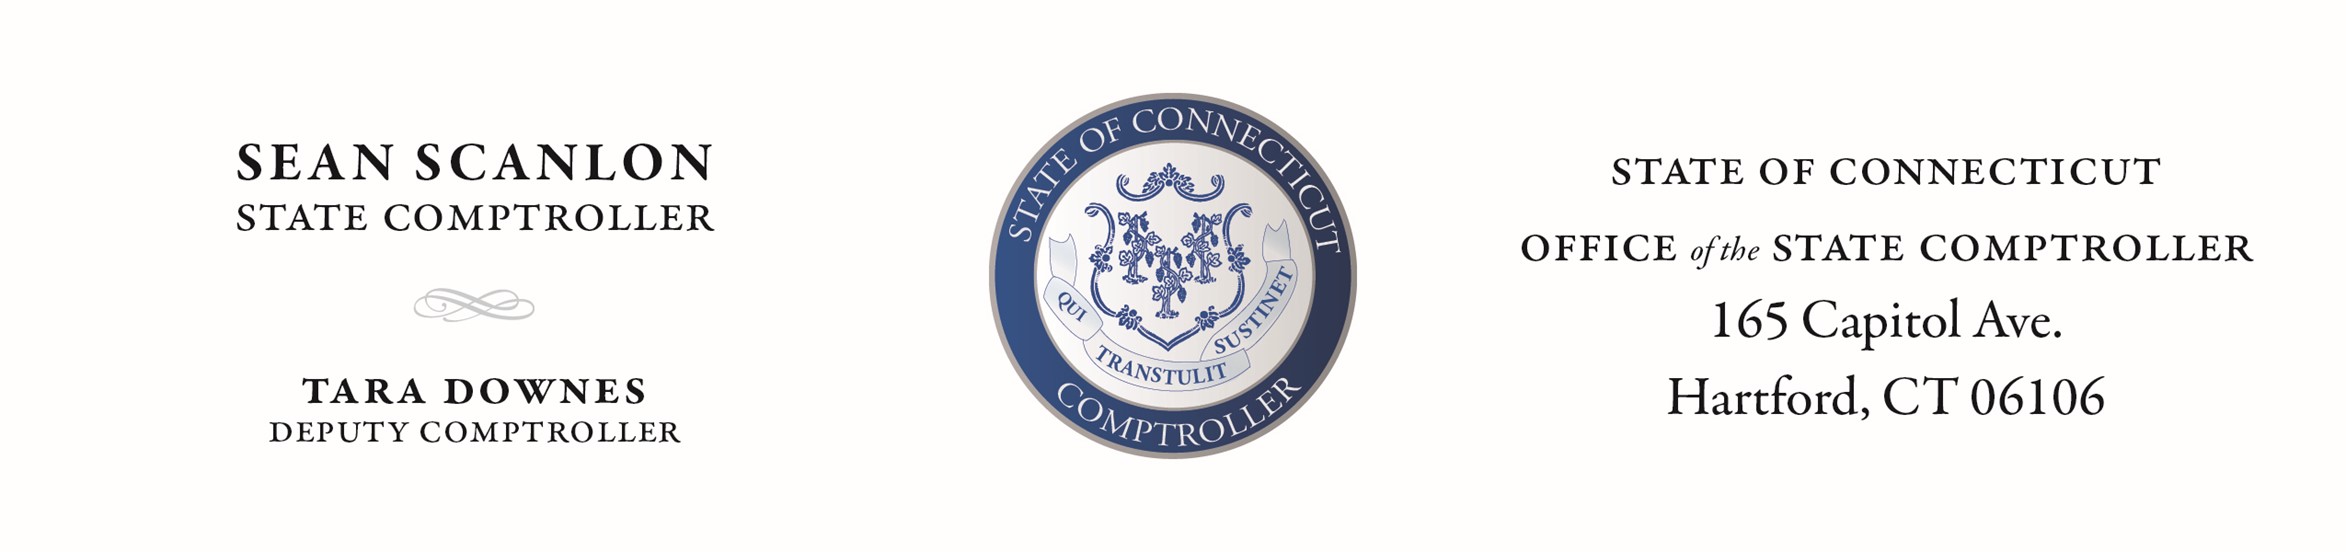 Office of the Comptroller letterhead